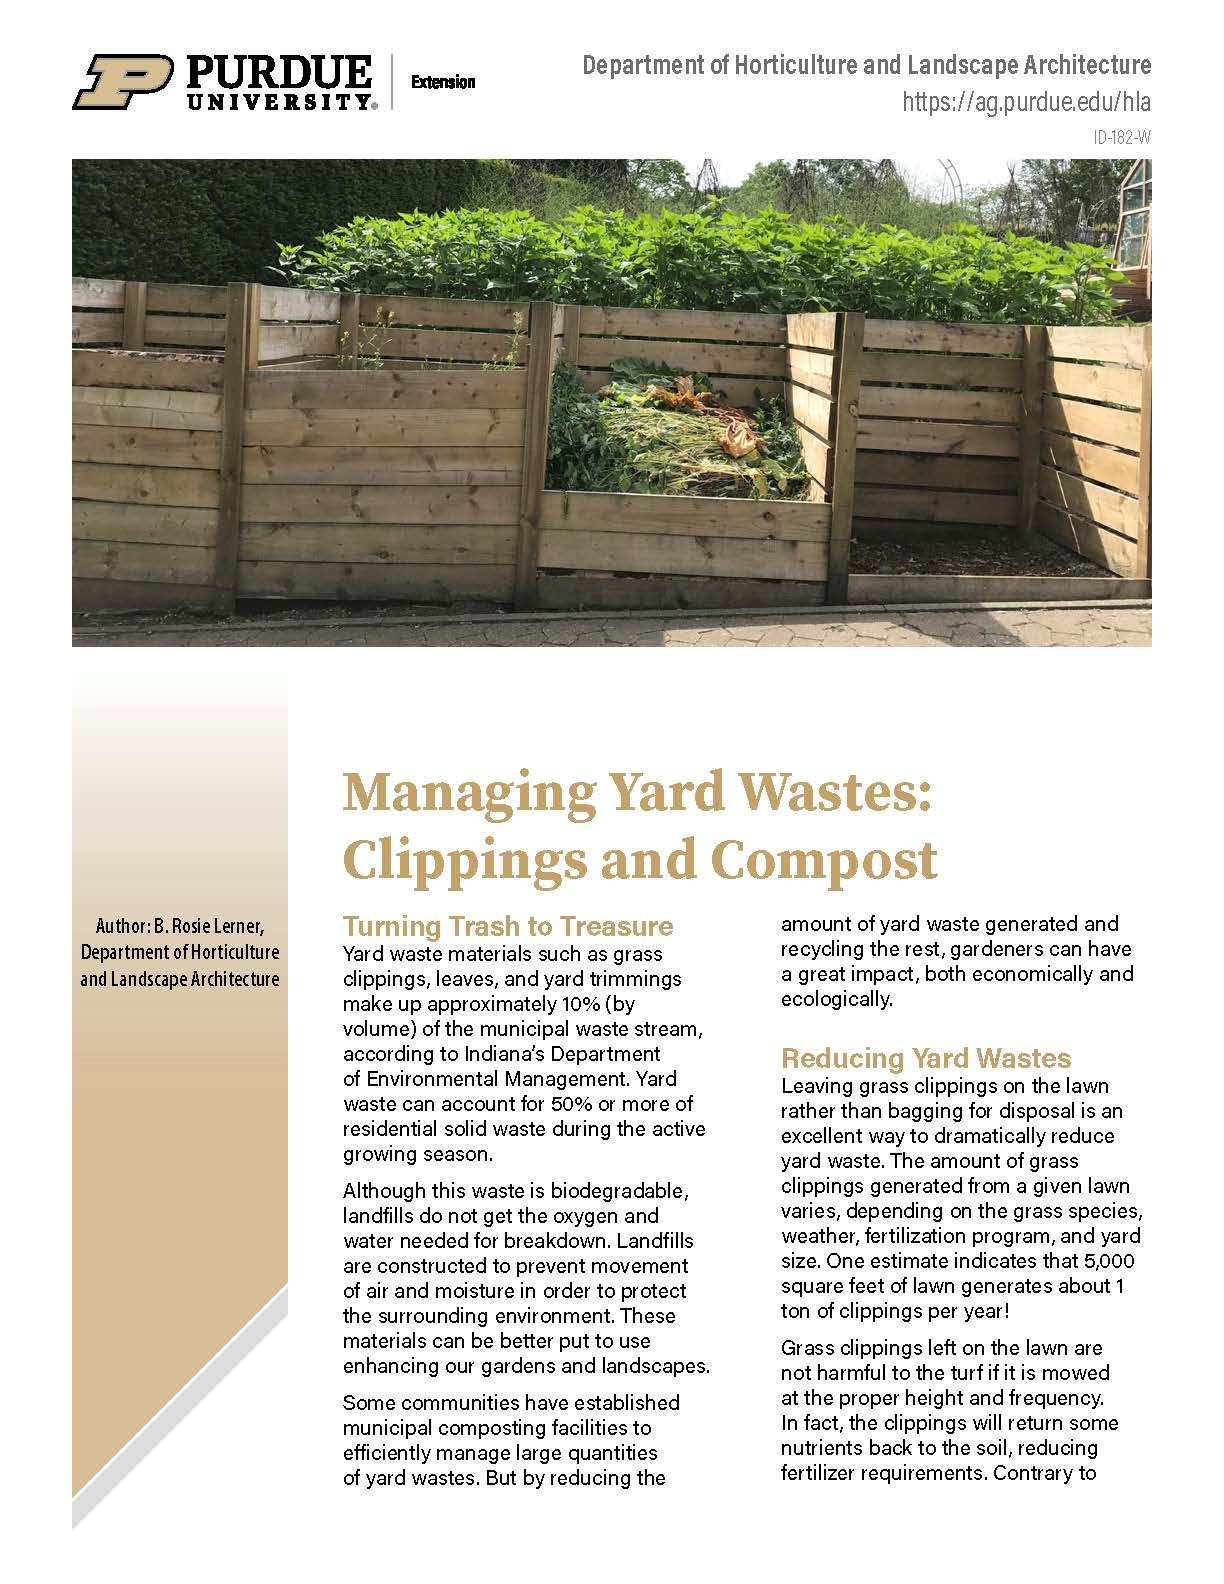 Managing Yard Waste: Clippings and Composting